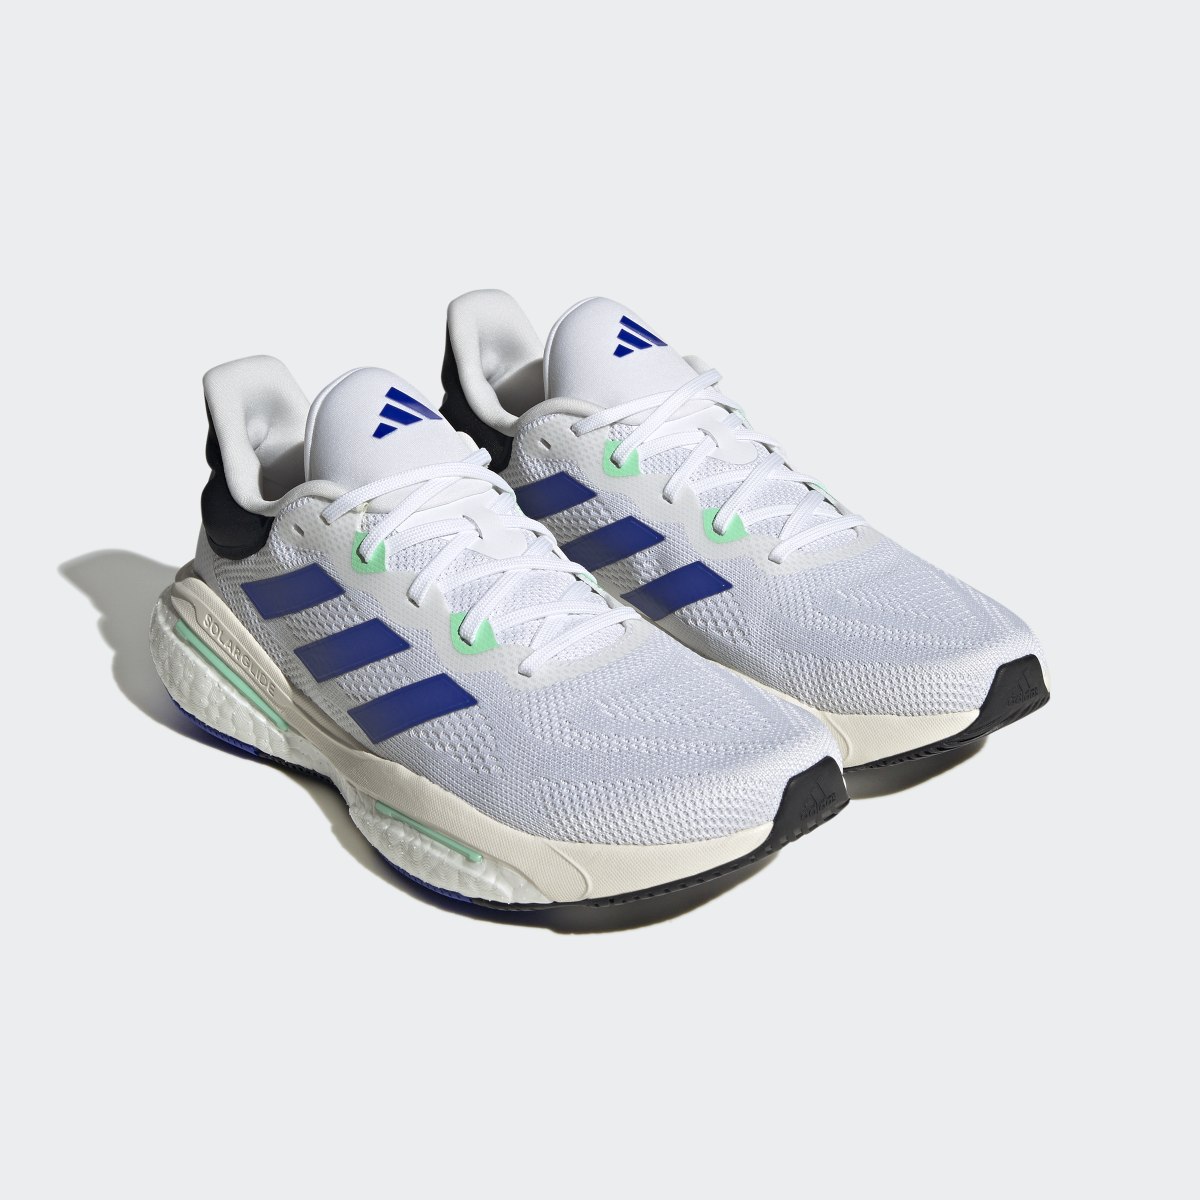 Adidas Solarglide 6 Running Shoes. 5